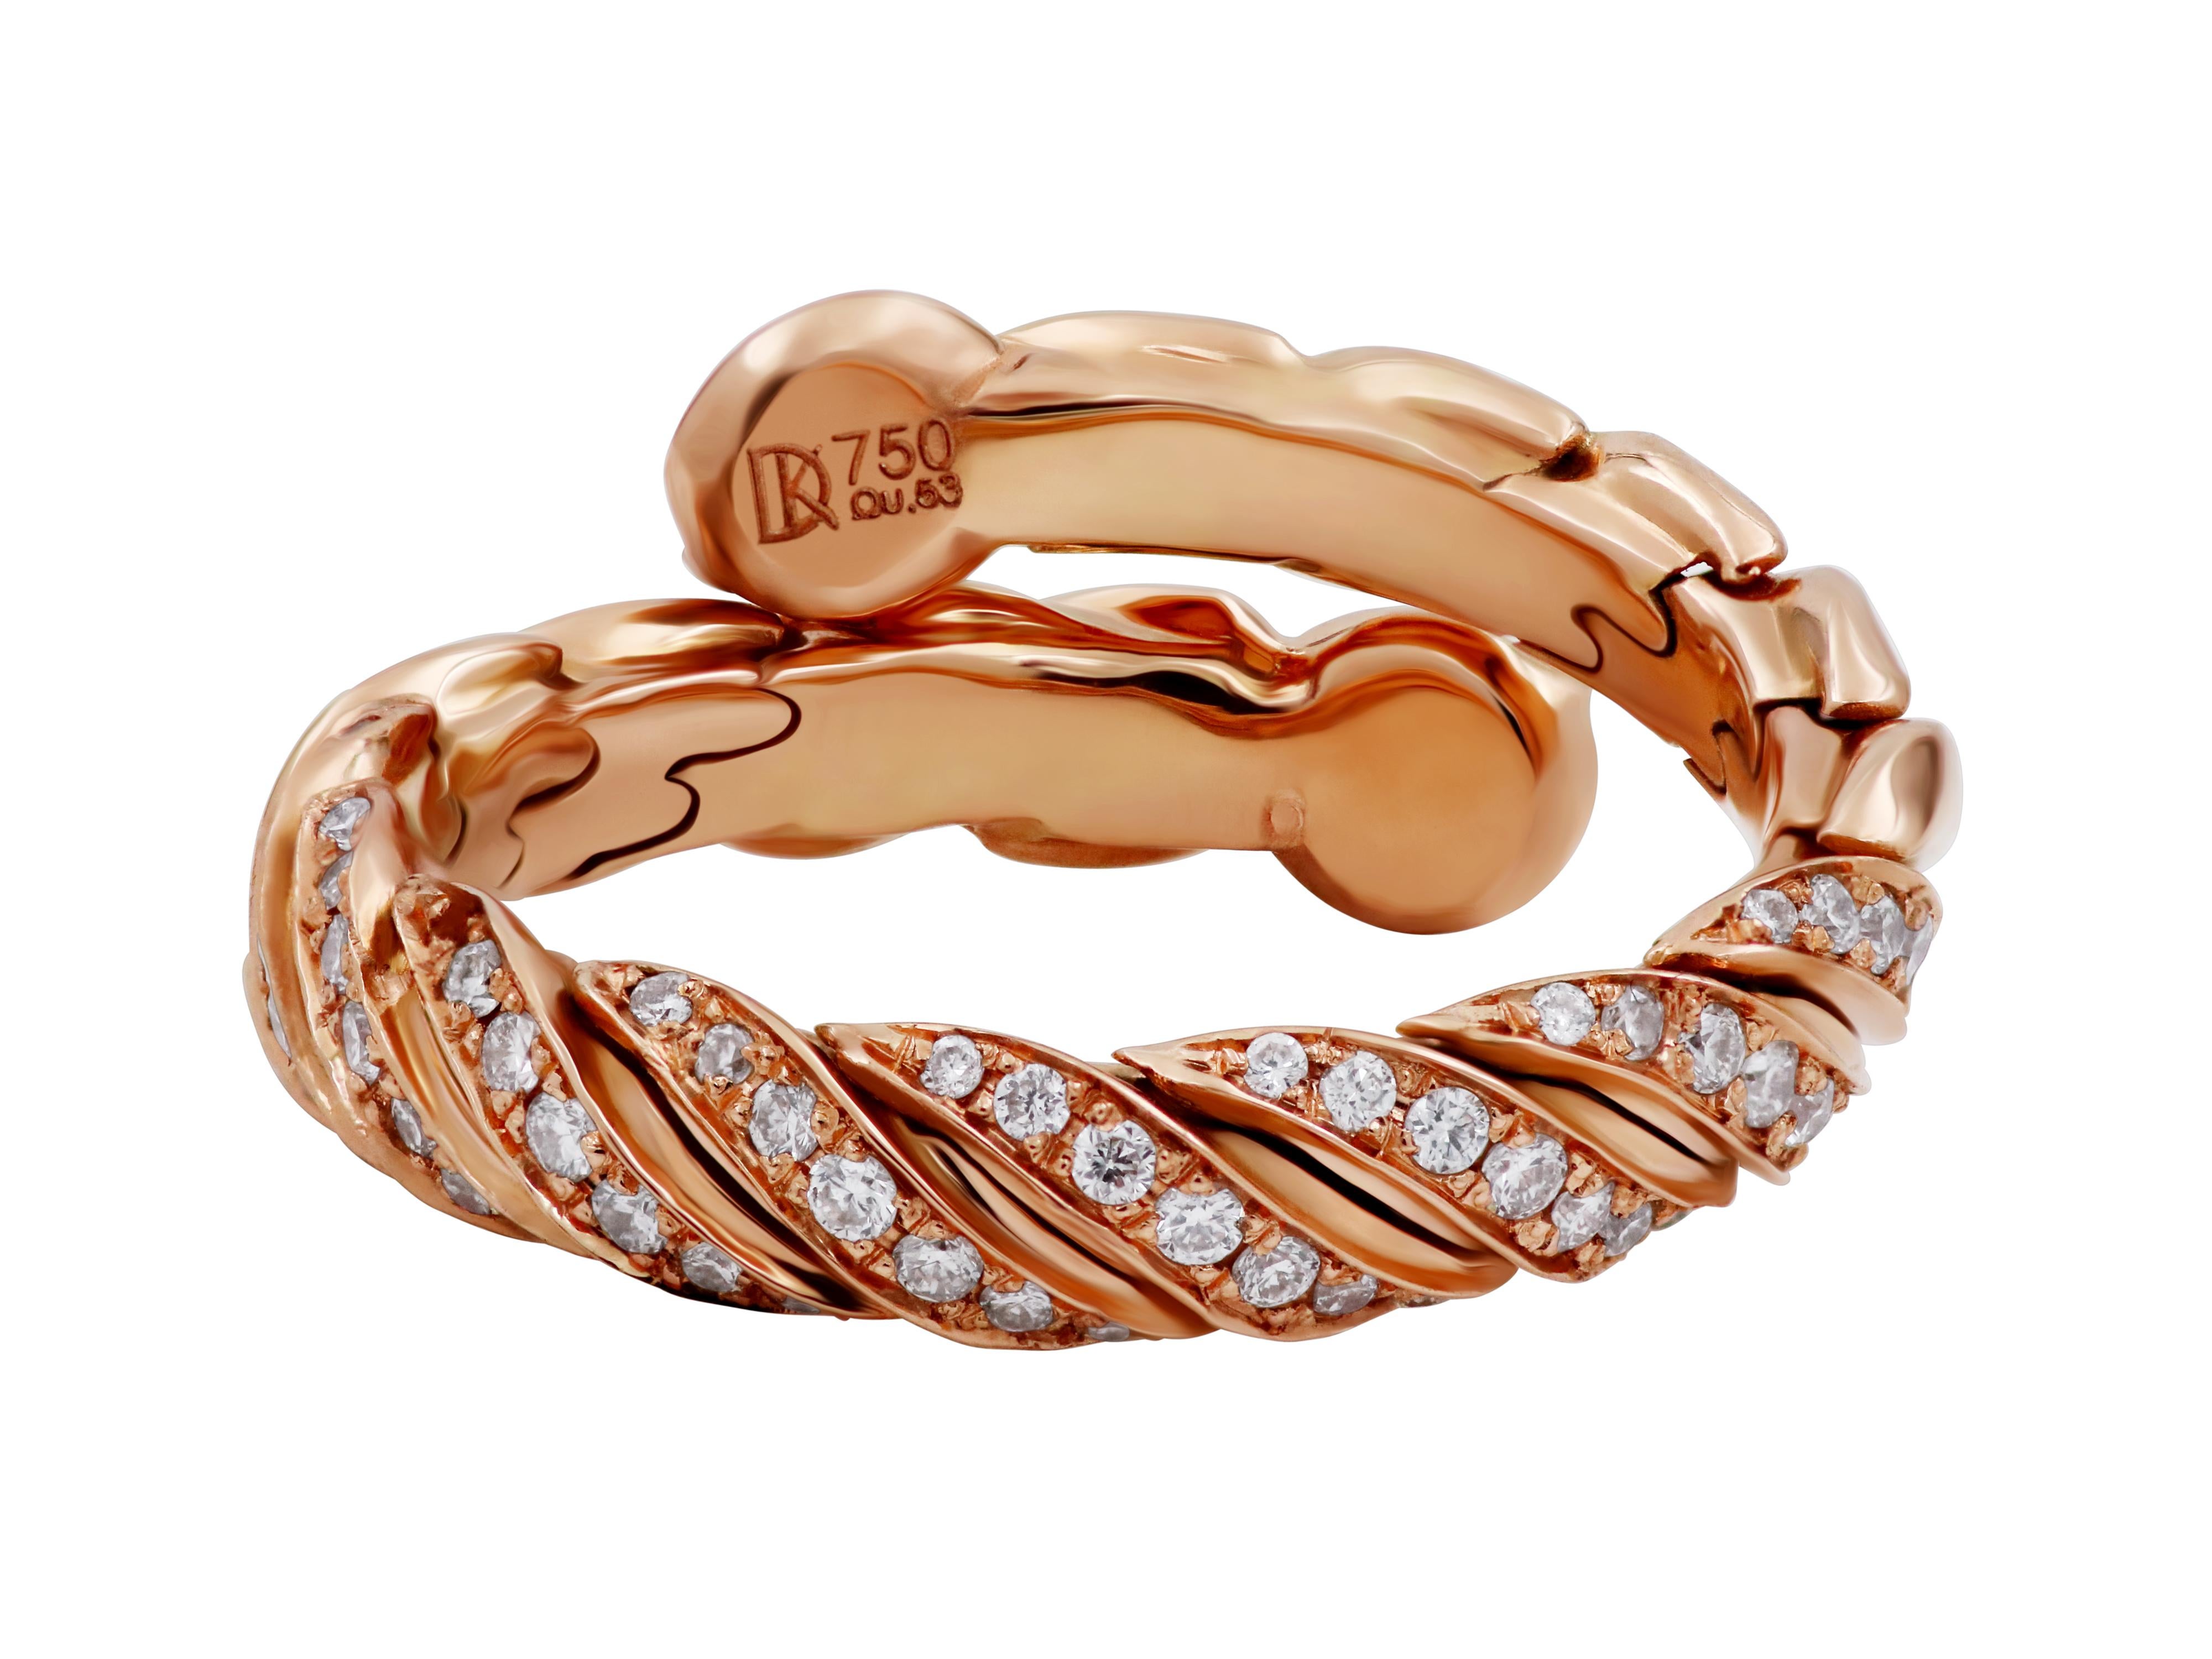 18k rose gold twisted adjustable ring with 0.29 carats brilliant cut diamonds.